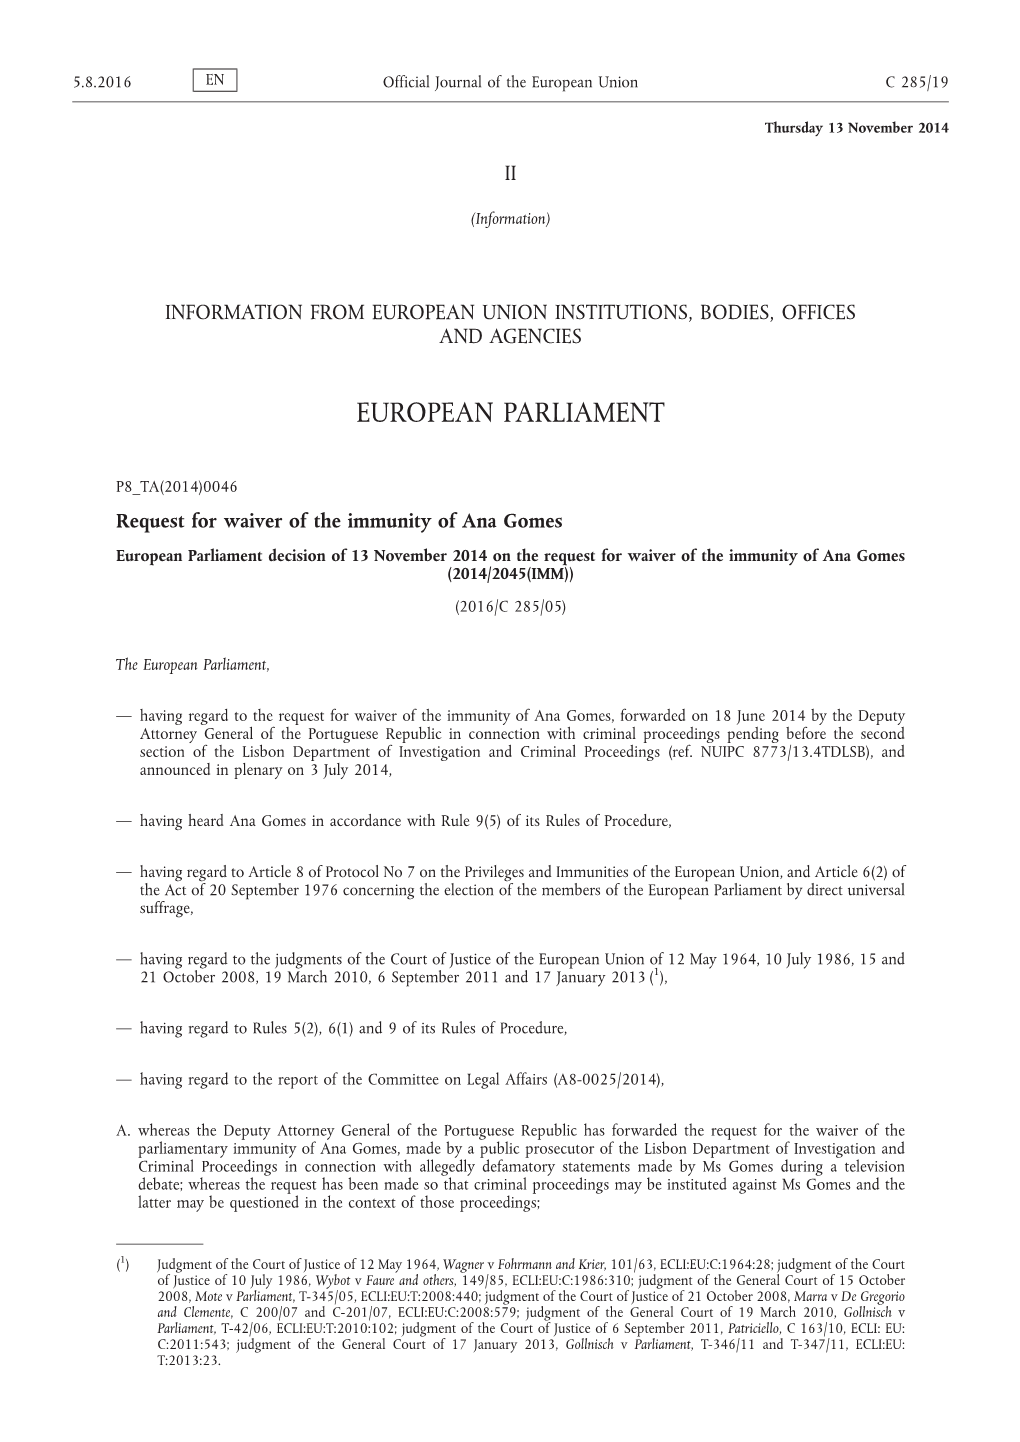 European Parliament Decision of 13 November 2014 on the Request for Waiver of the Immunity of Ana Gomes (2014/2045(IMM)) (2016/C 285/05)